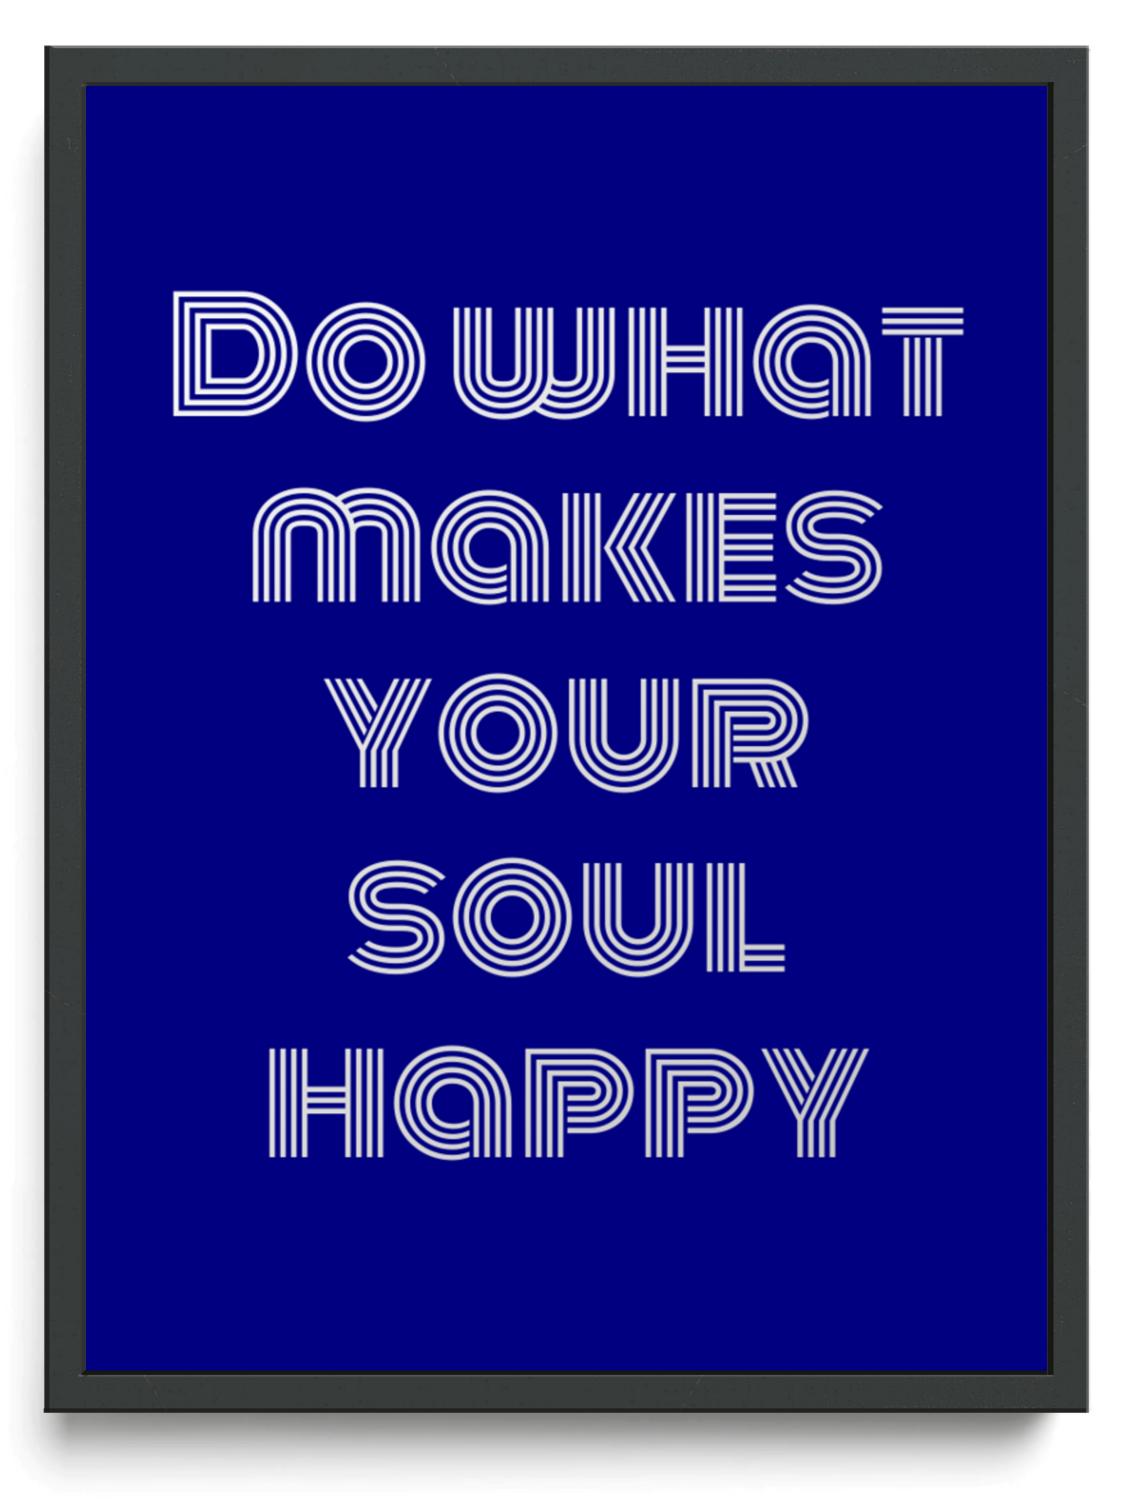 Do what makes your soul happy framed typographic print